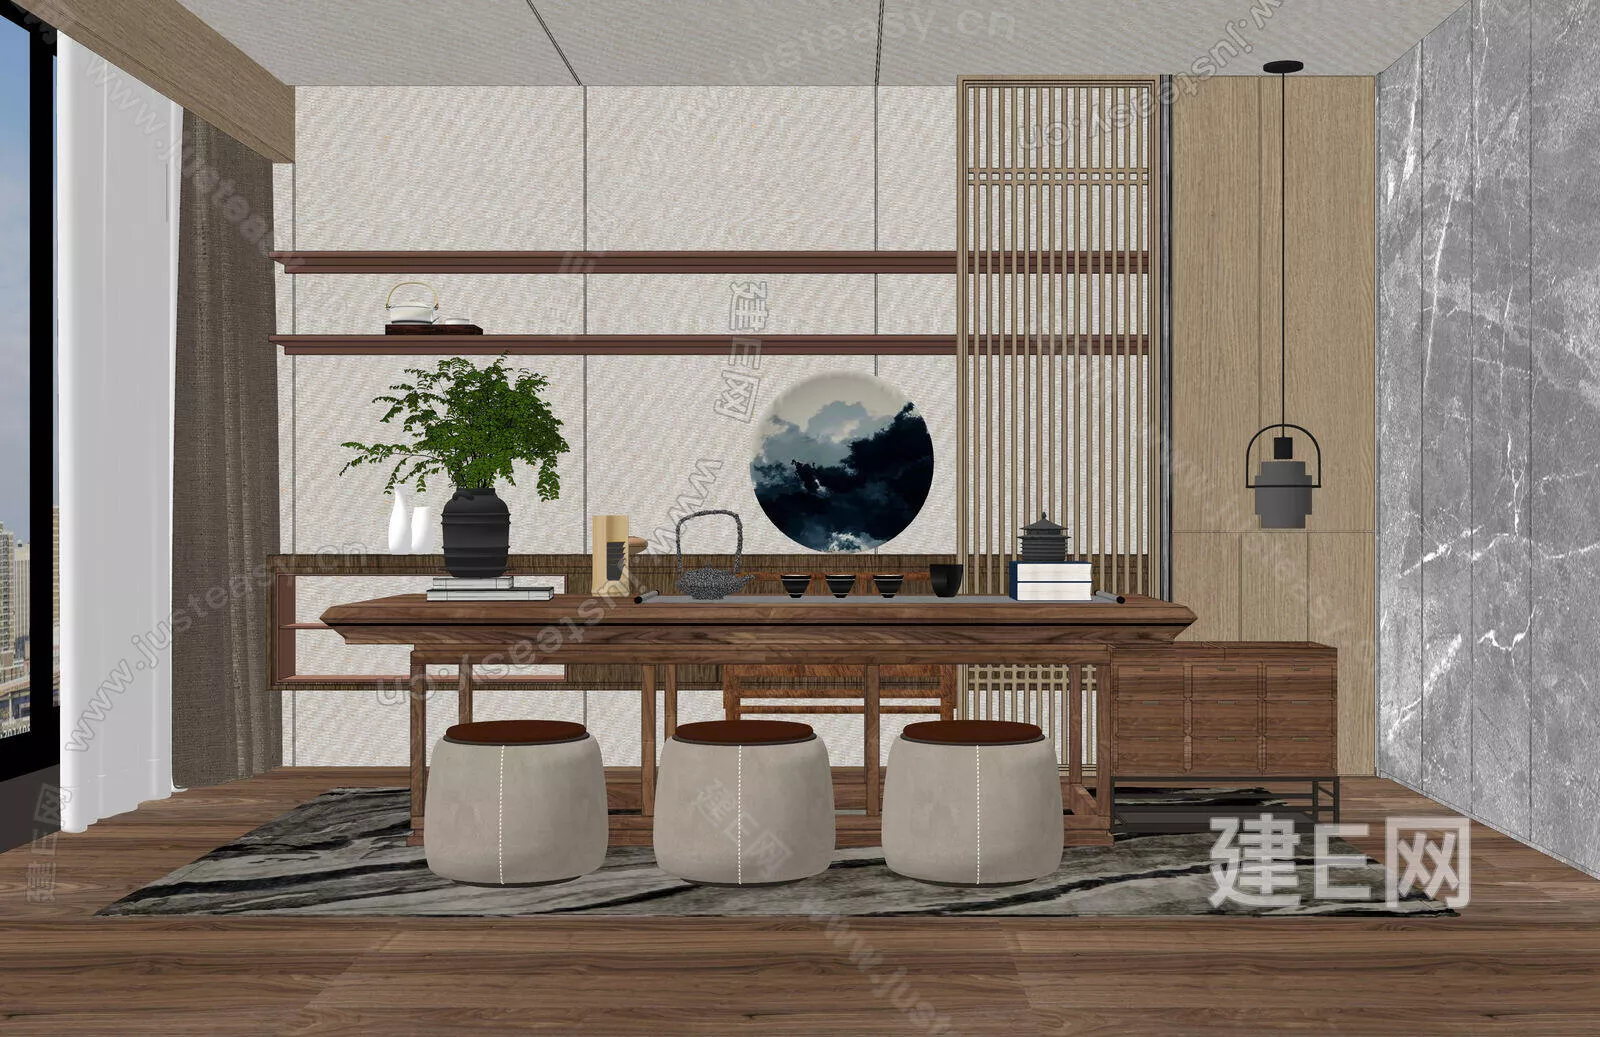 CHINESE TEAROOM - SKETCHUP 3D SCENE - ENSCAPE - 112542143